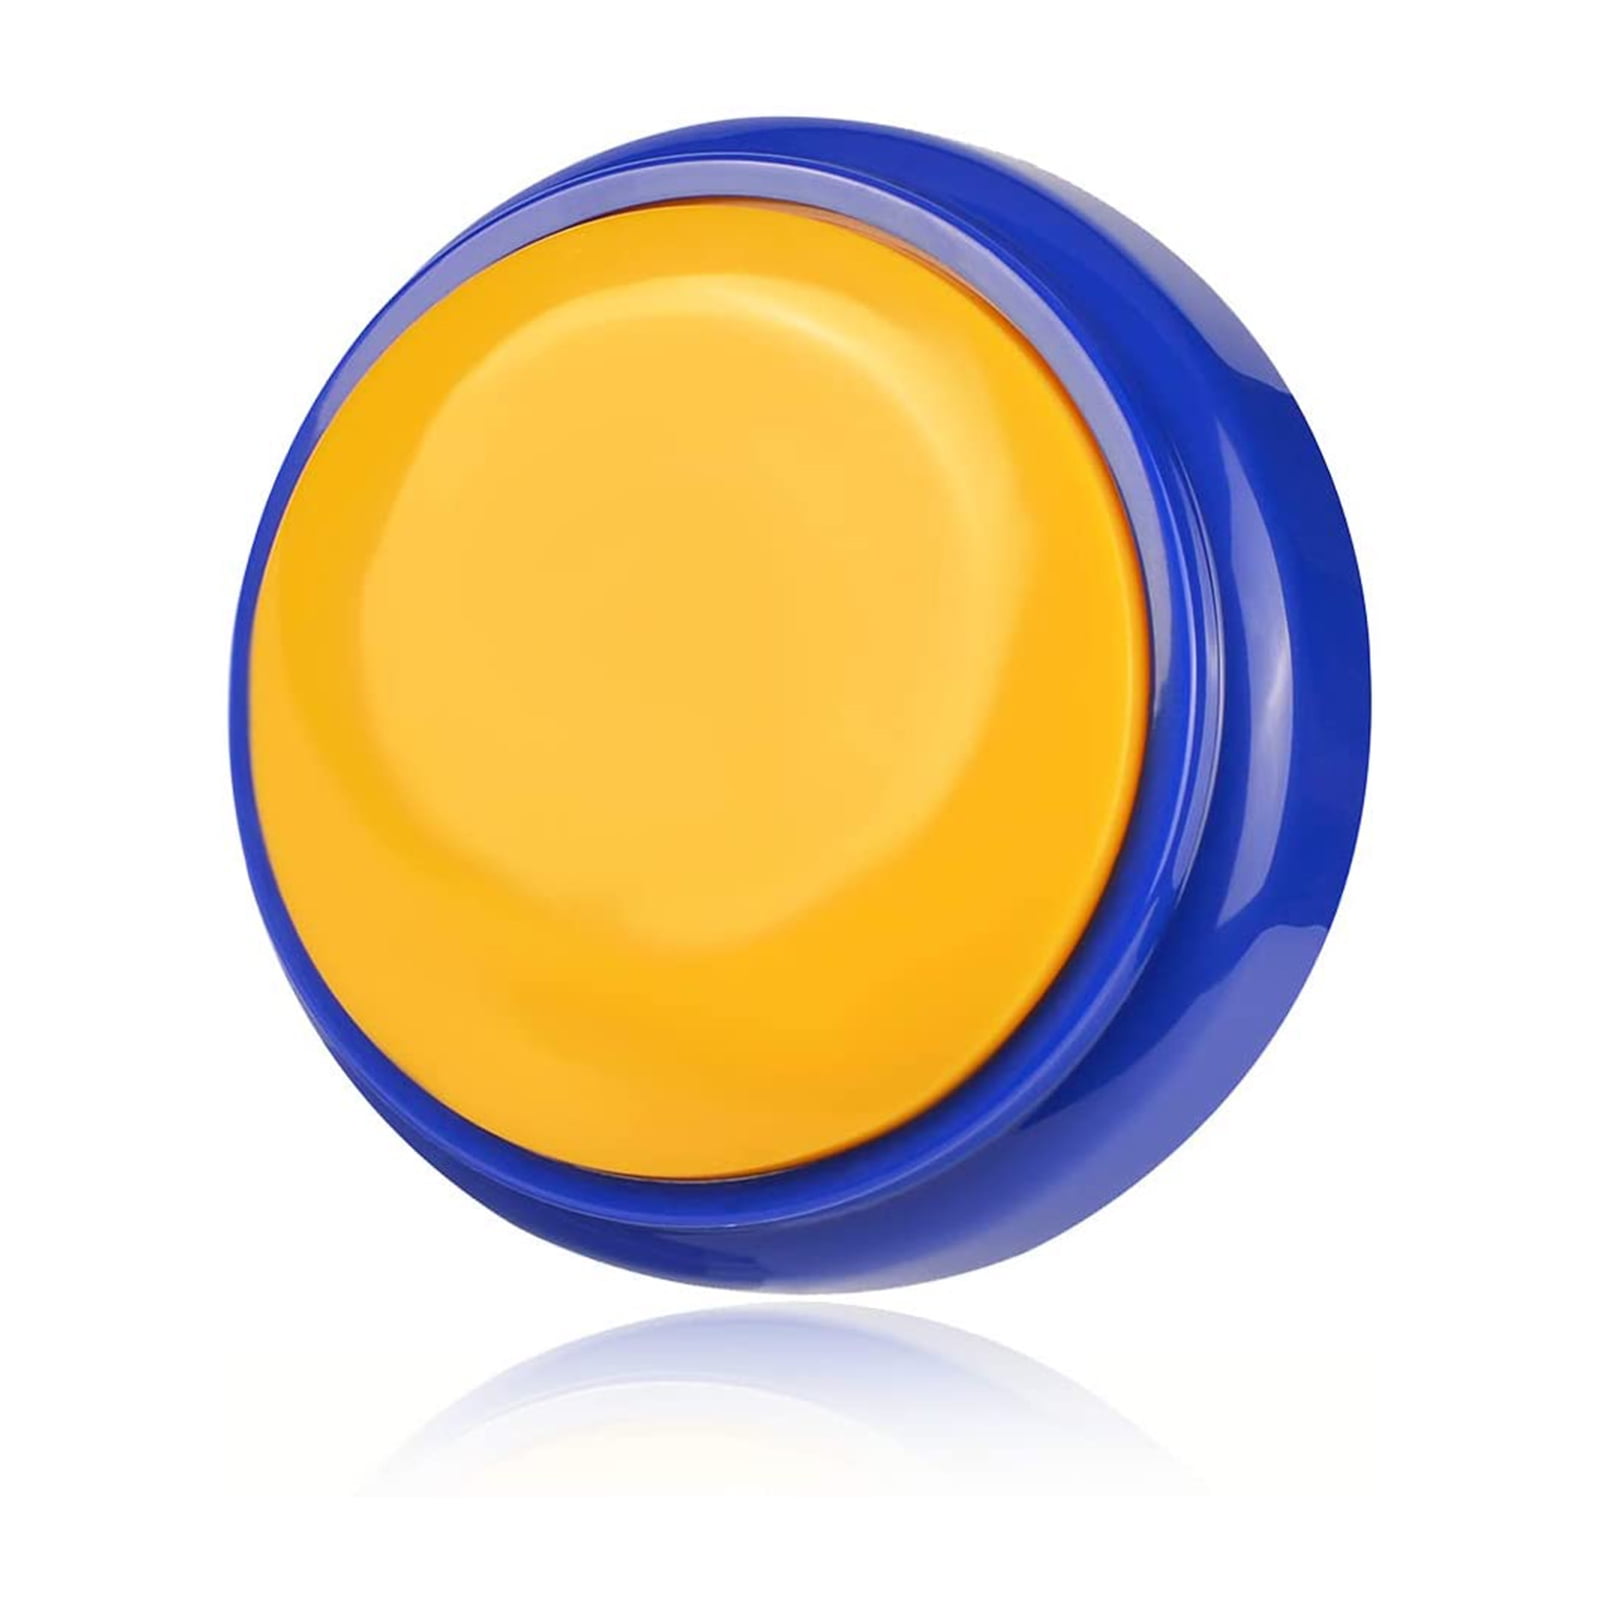 Details about   Small Yellow Circle Push Button Arcade Games 